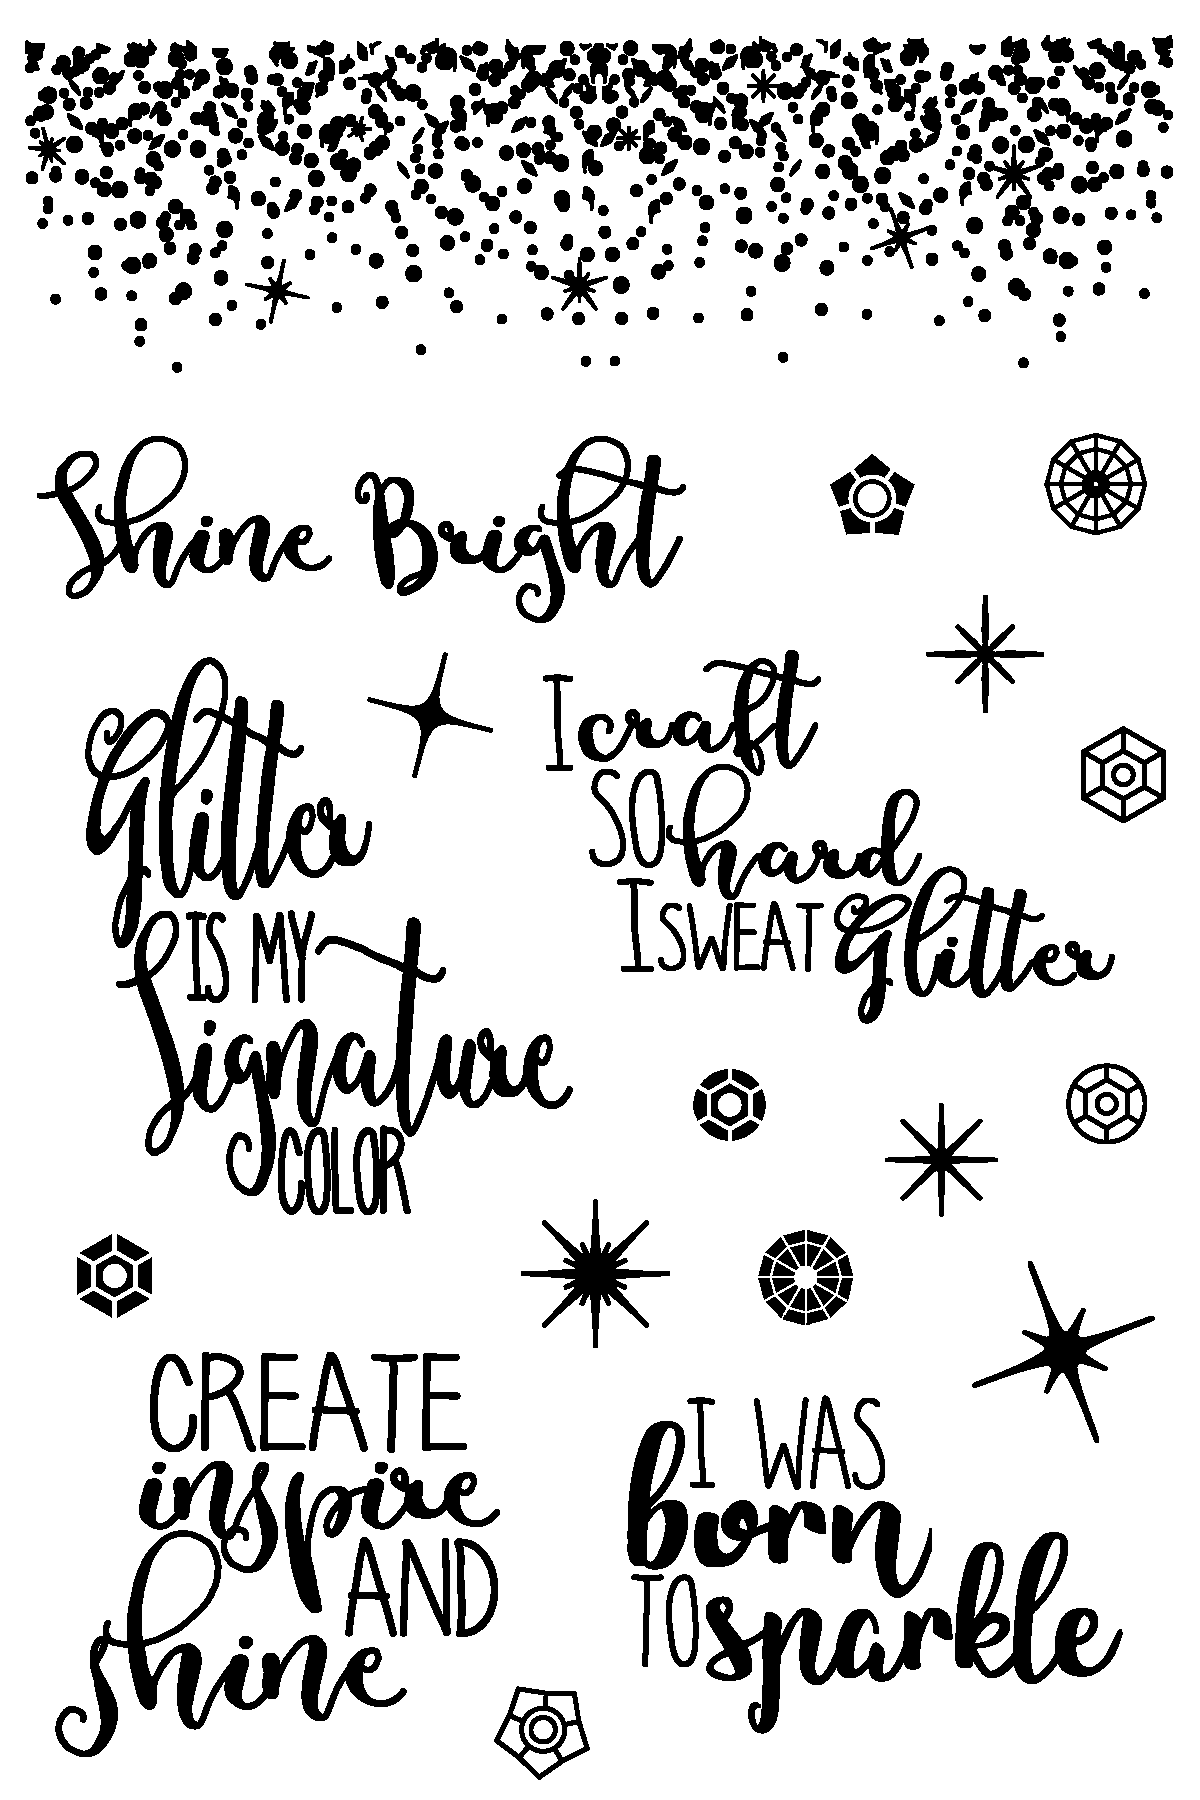 Born to Sparkle by Joy Clair Stamps